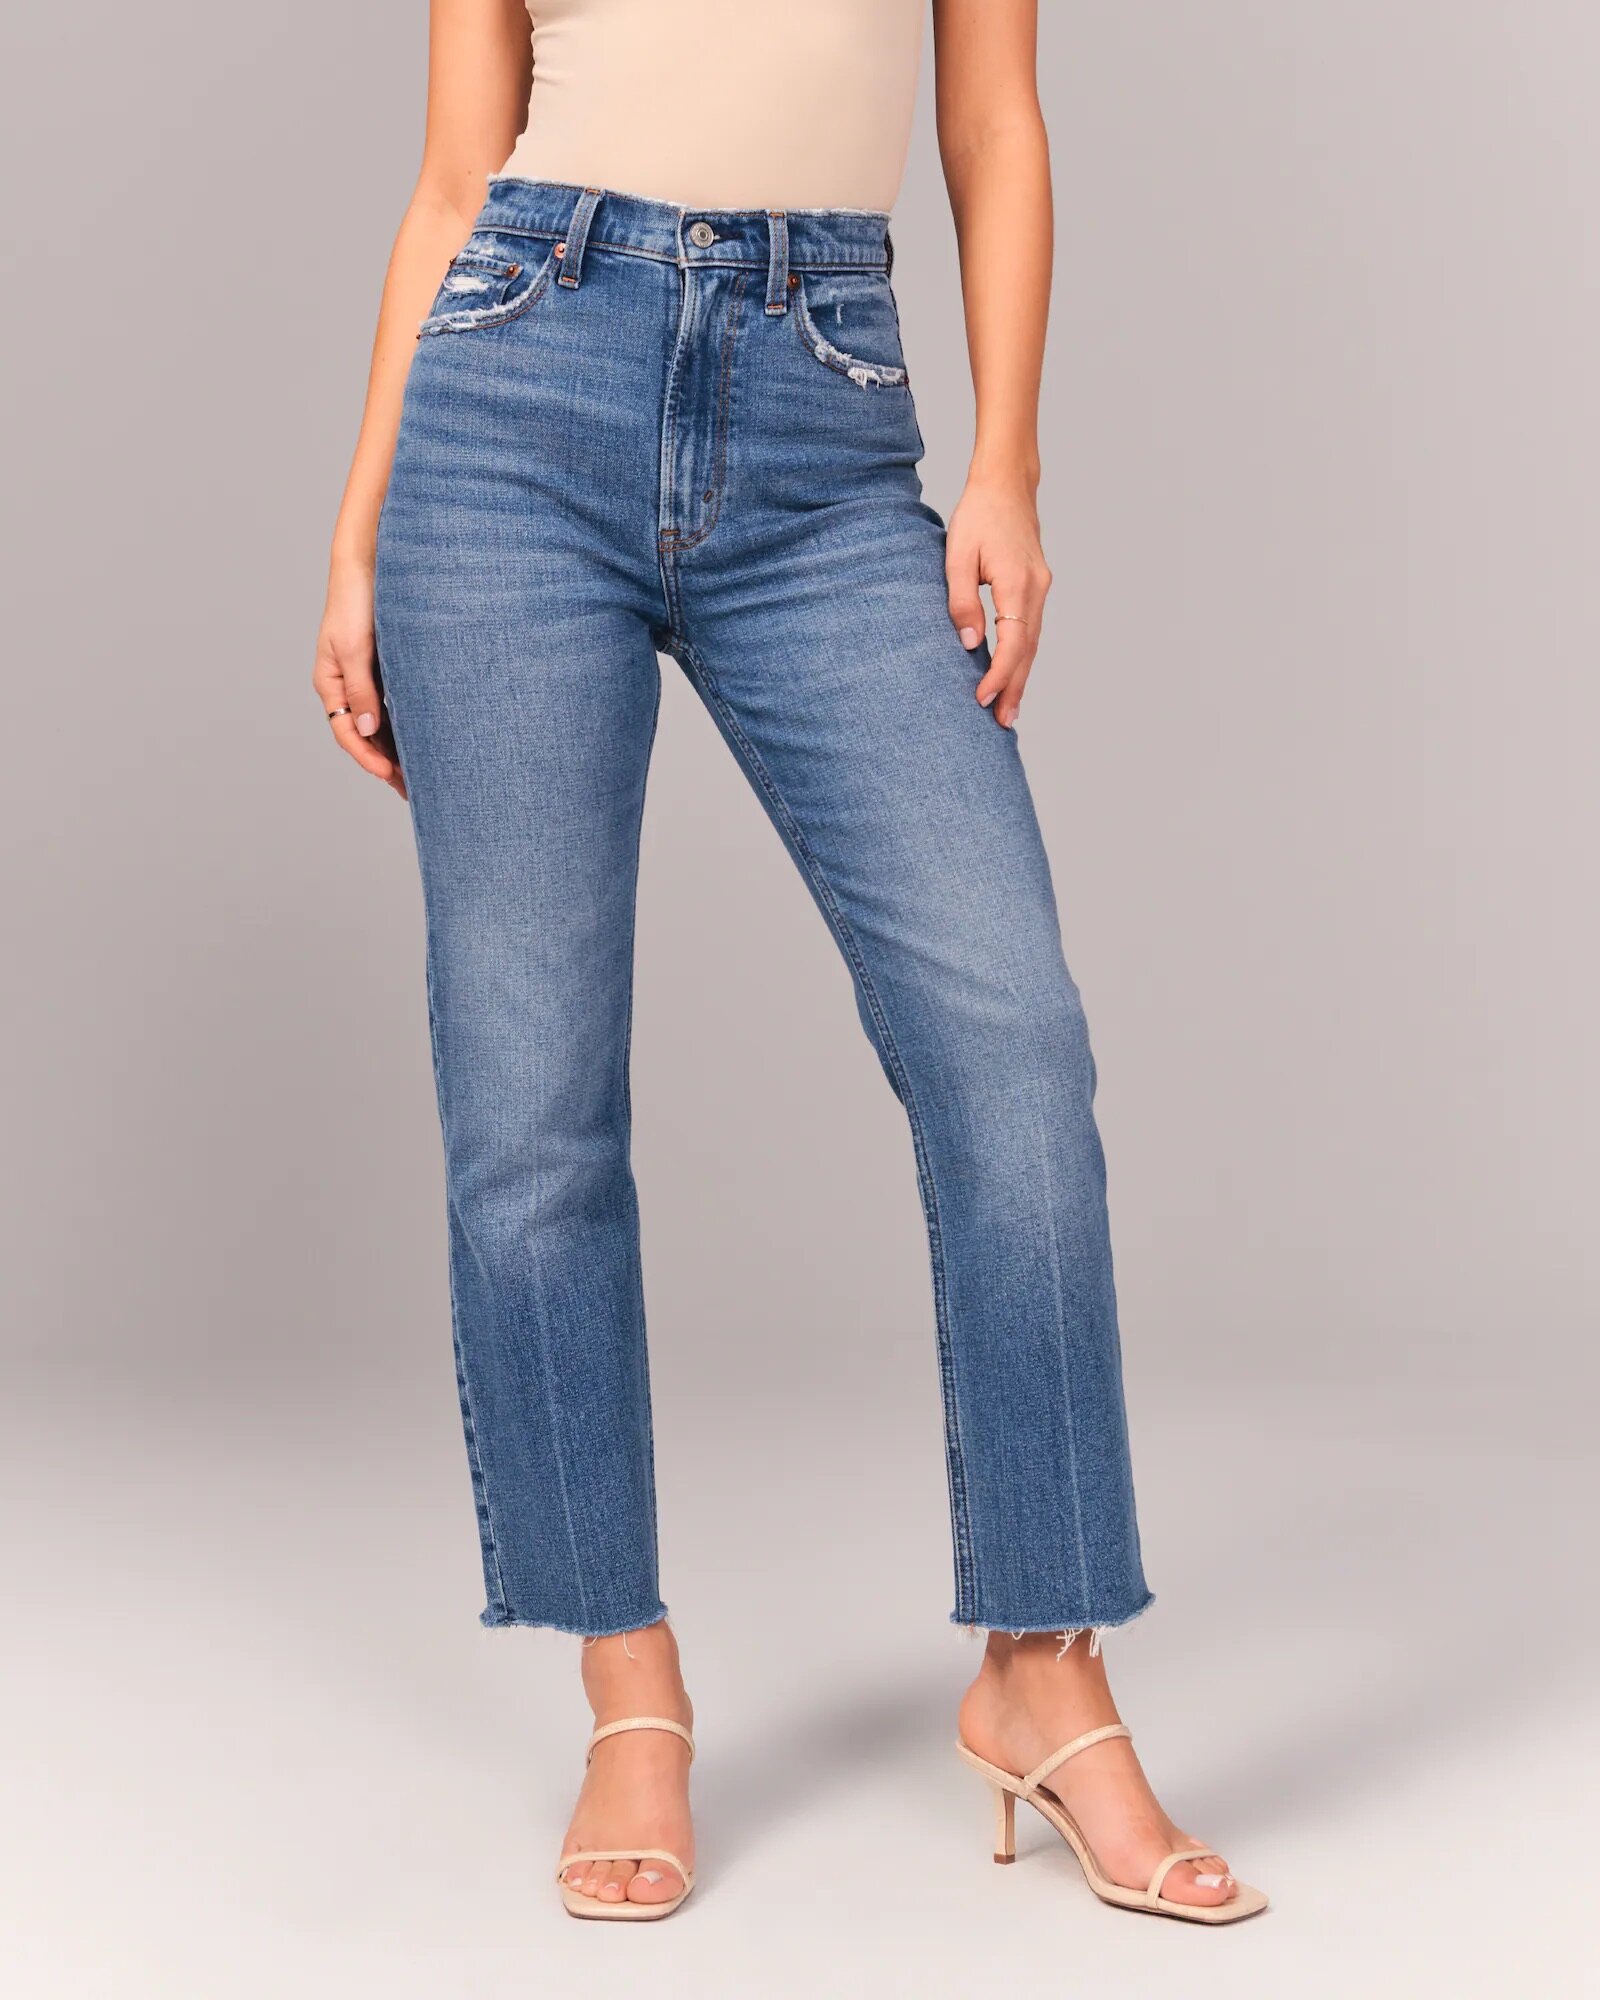 Straight Leg Jeans Are The Greatest Lie The Devil Ever Told — The Candidly